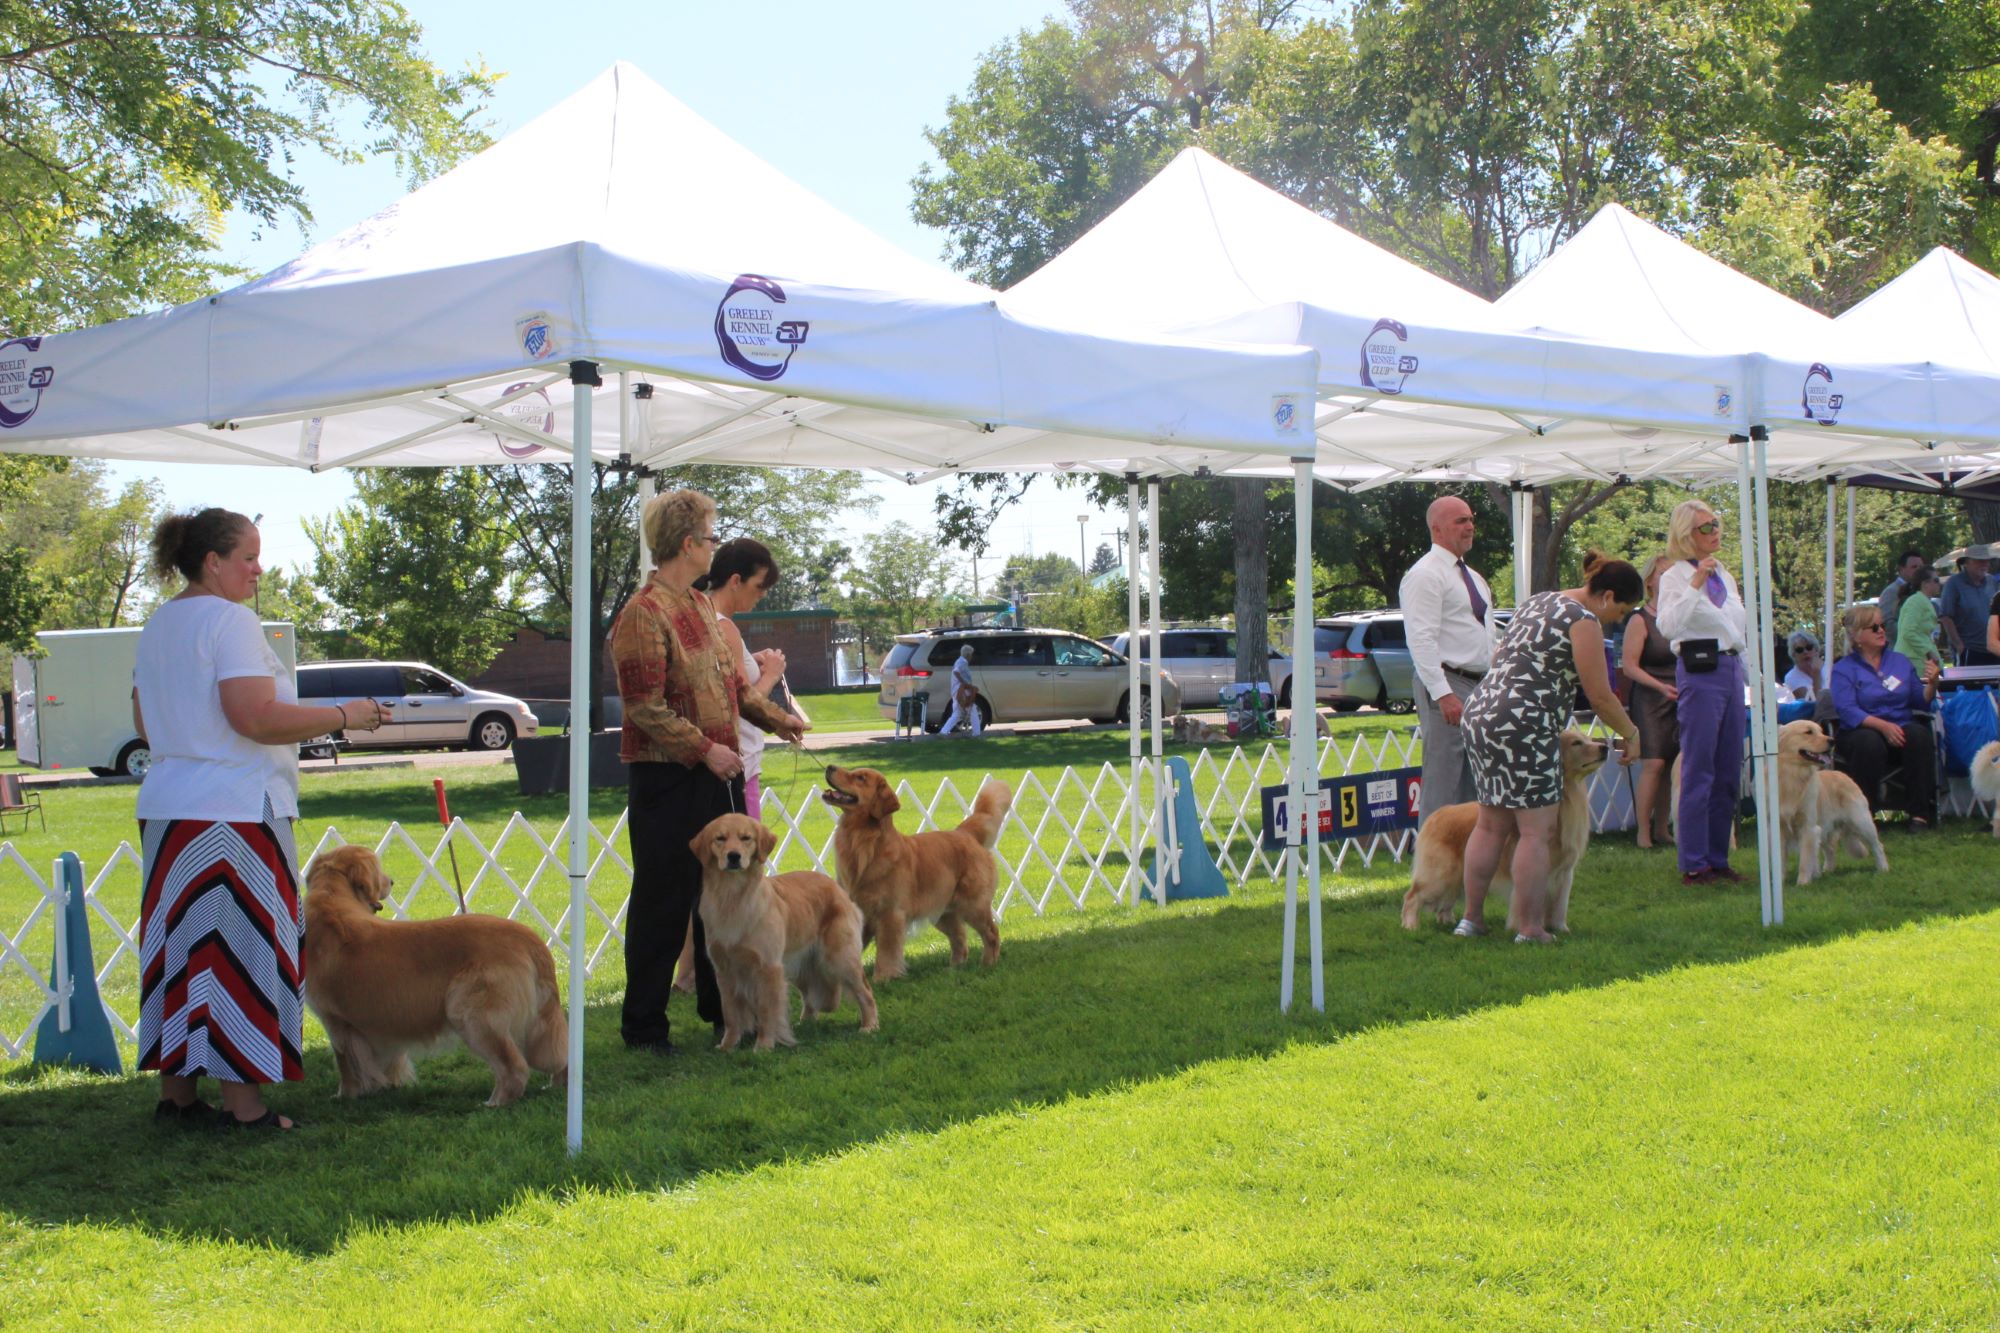 Handlers stand with their dogs under shady tents on an outdoor lawn